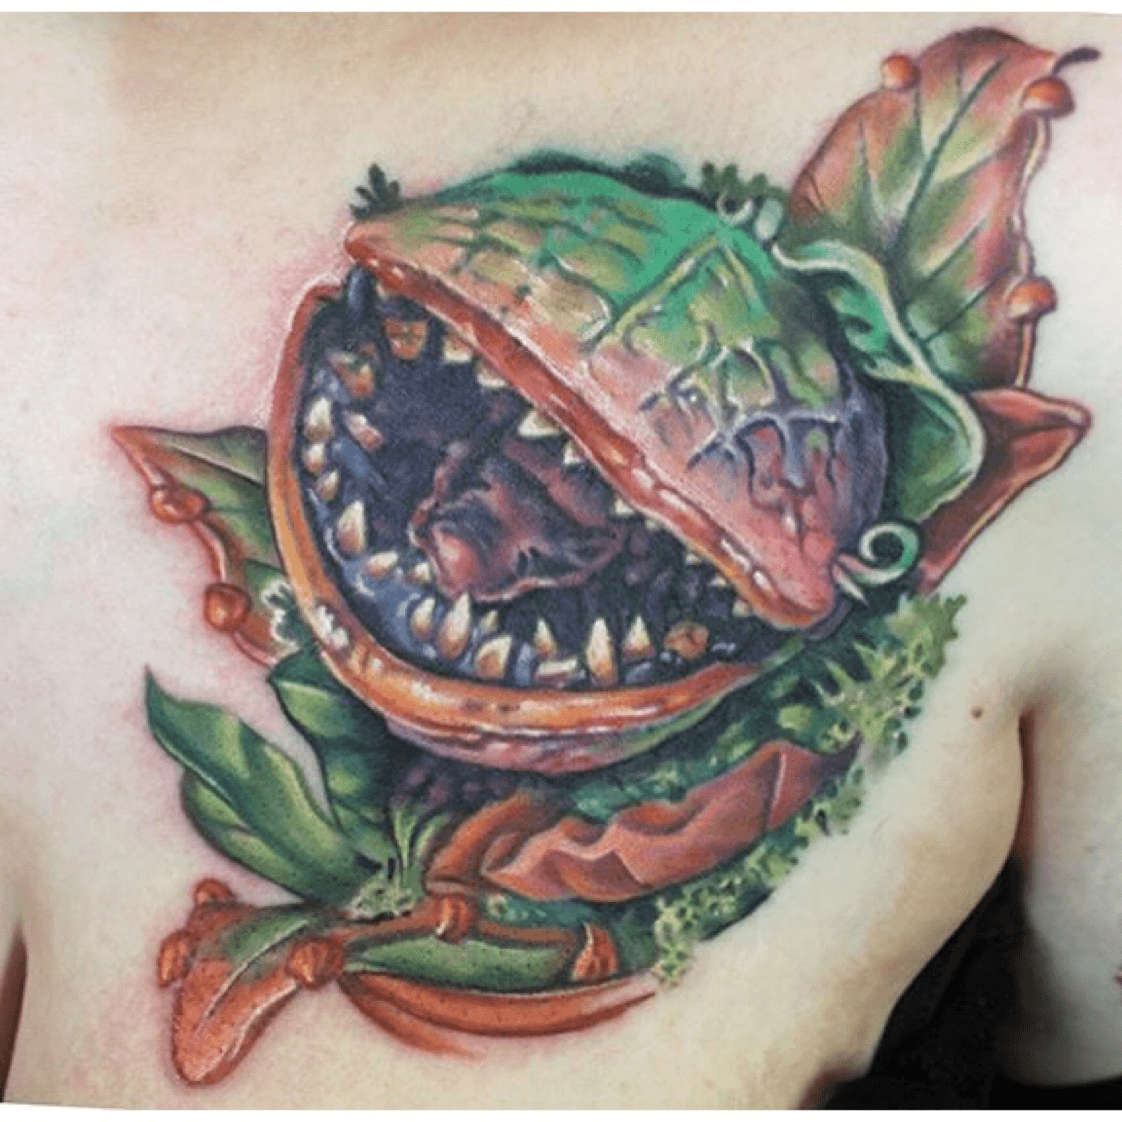 Incredible Audrey II tattoo by Barb at Devoted Ink Temecula CA  rtattoos